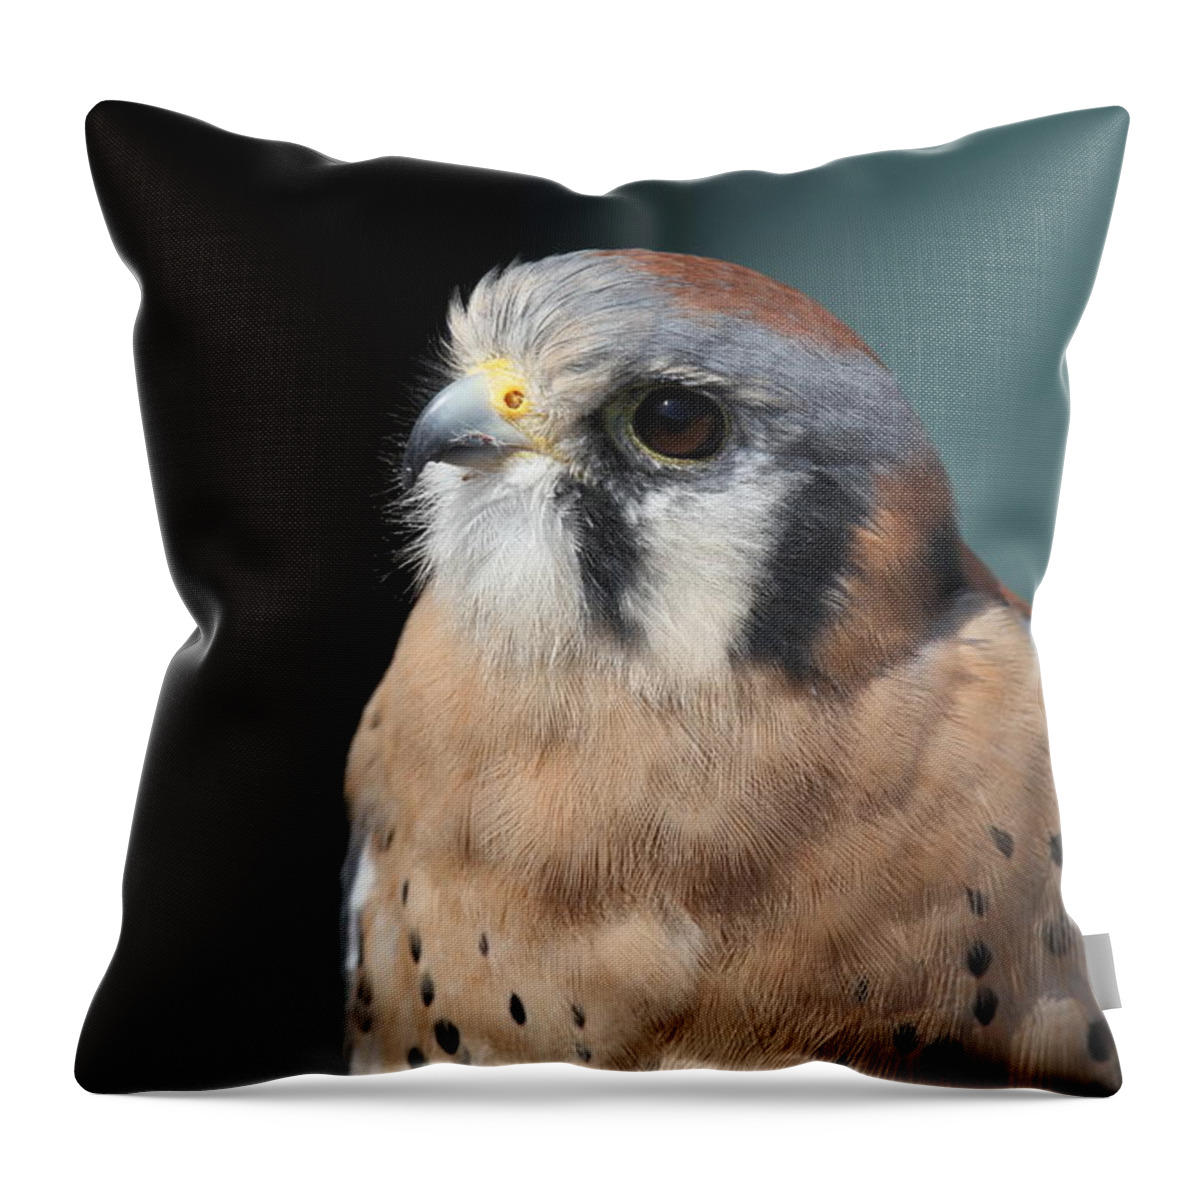 Falcon Throw Pillow featuring the photograph Eye of Focus by Laddie Halupa